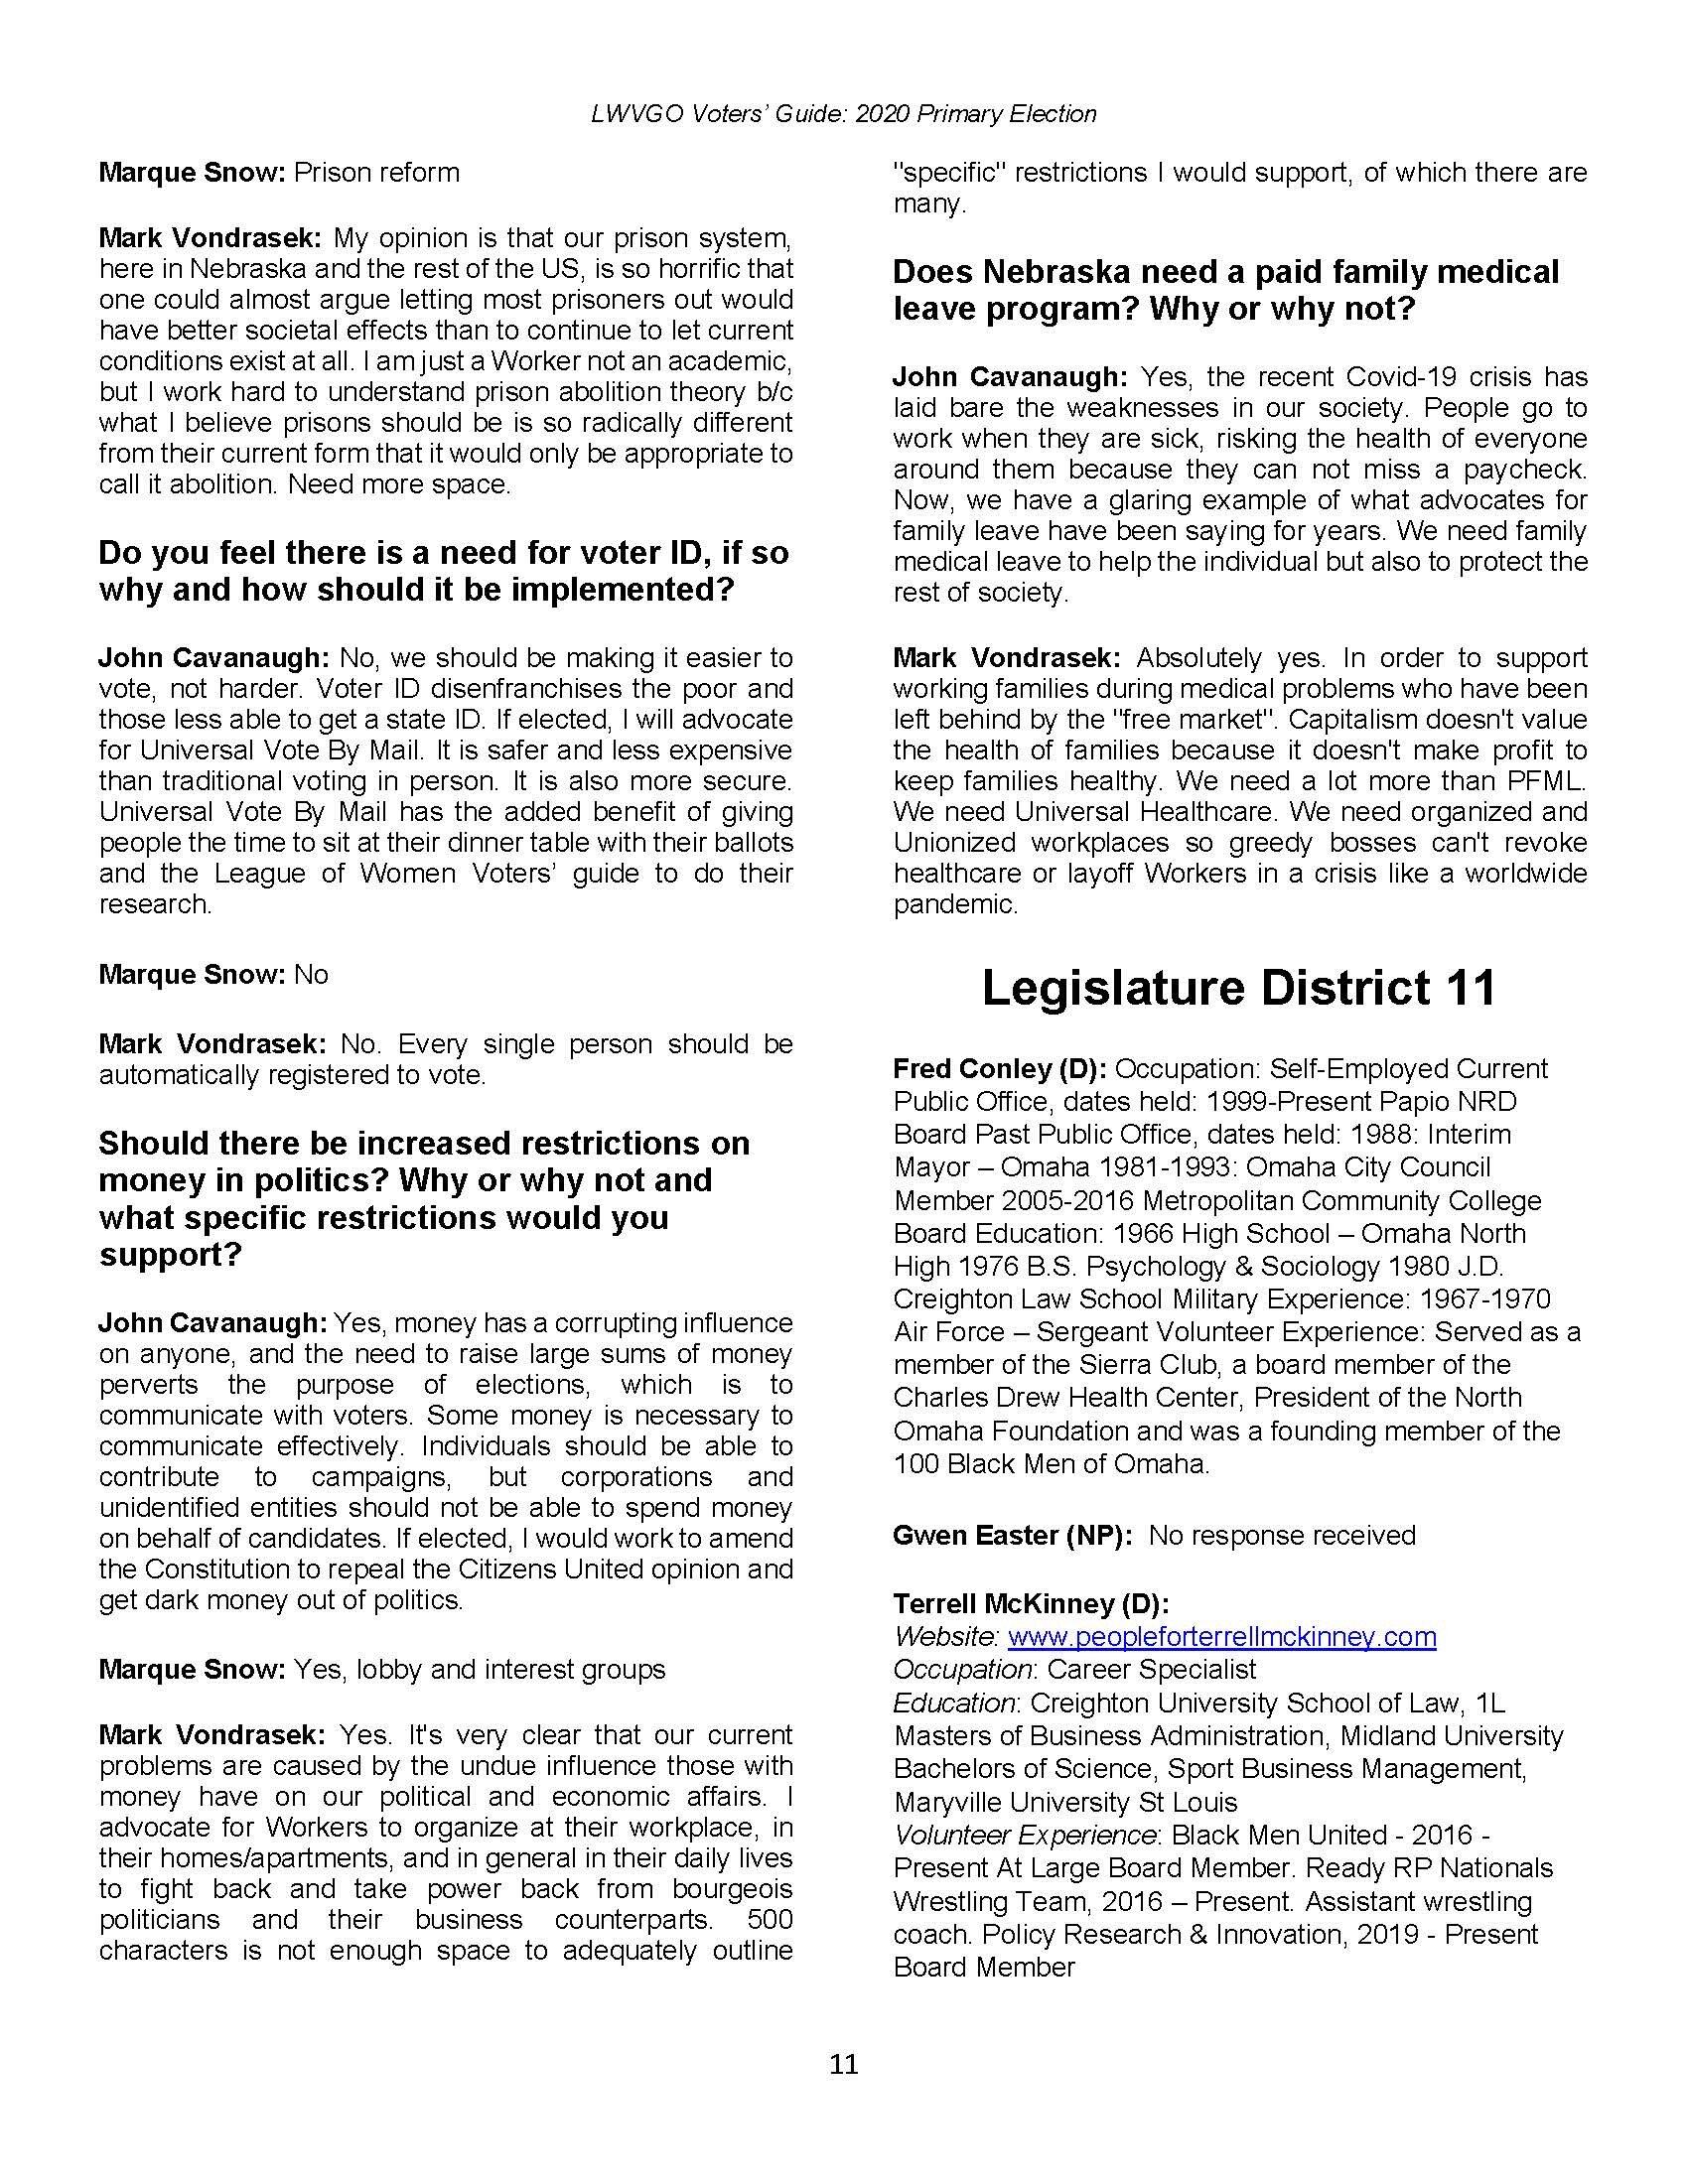 2020-Primary-Voters-Guide-LWVGO_0_Page_11.jpg